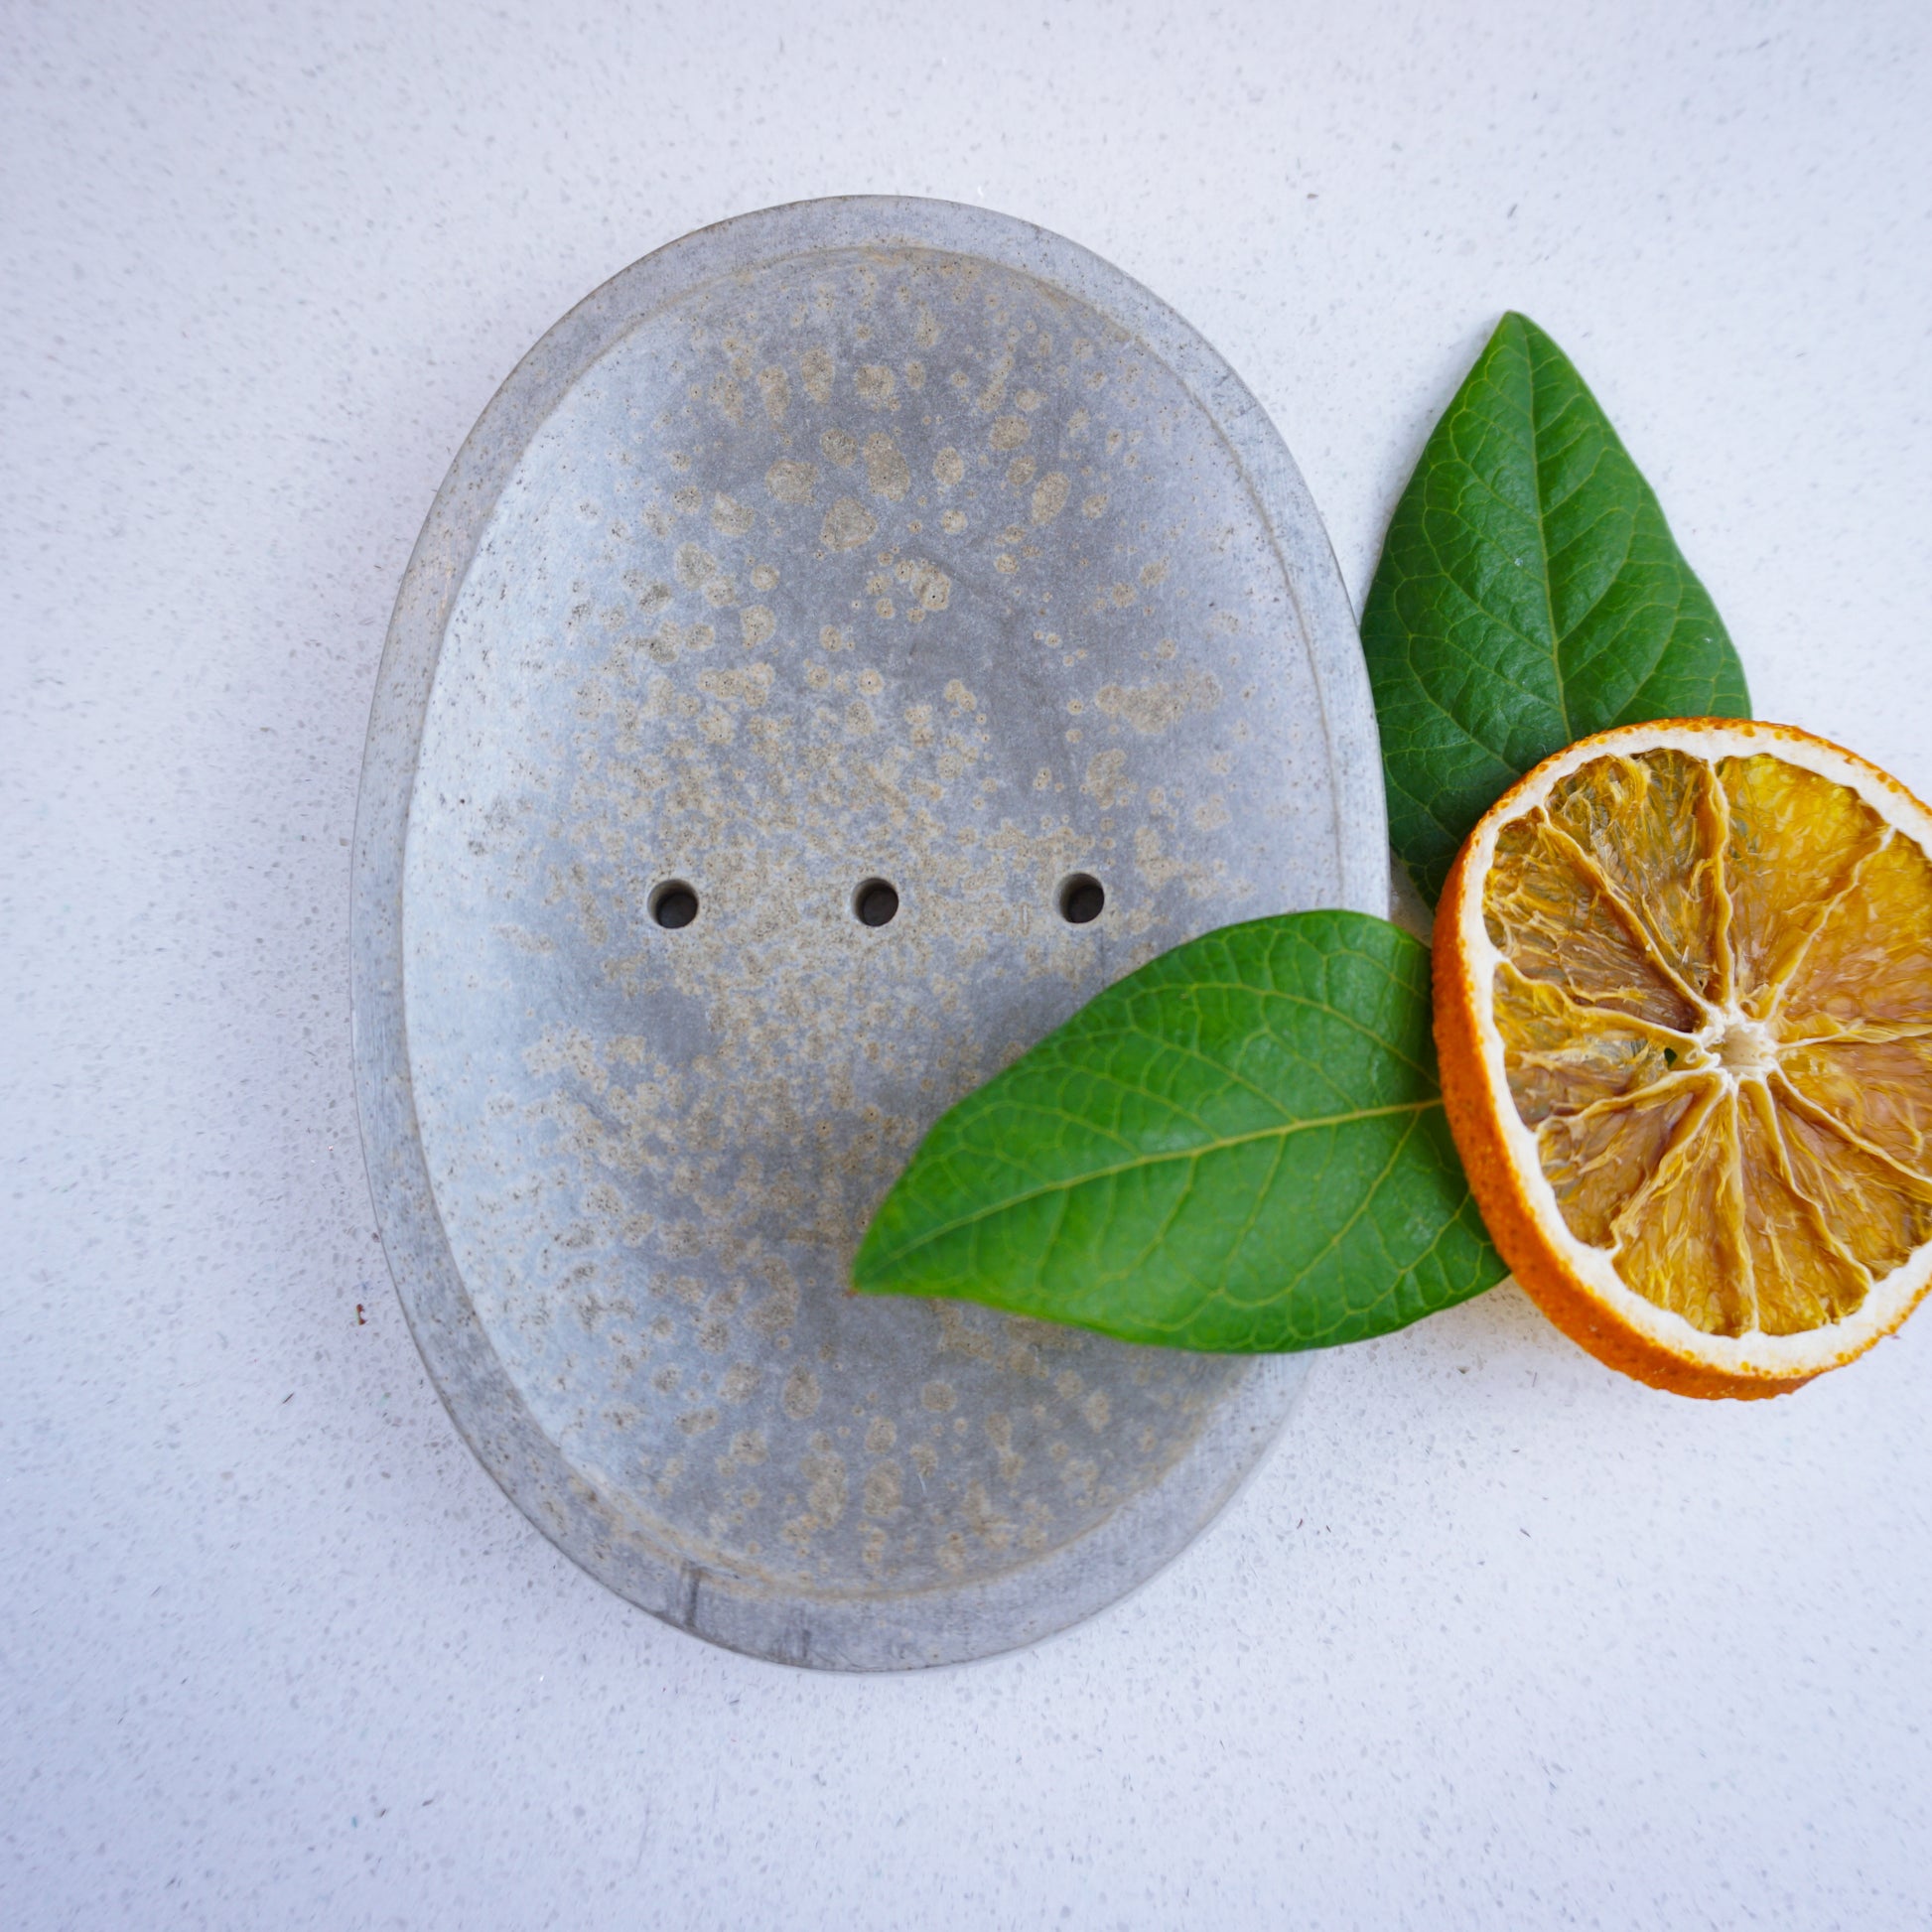 Concrete soap dish with 3 drainage holes. Orange and leaves for decoration